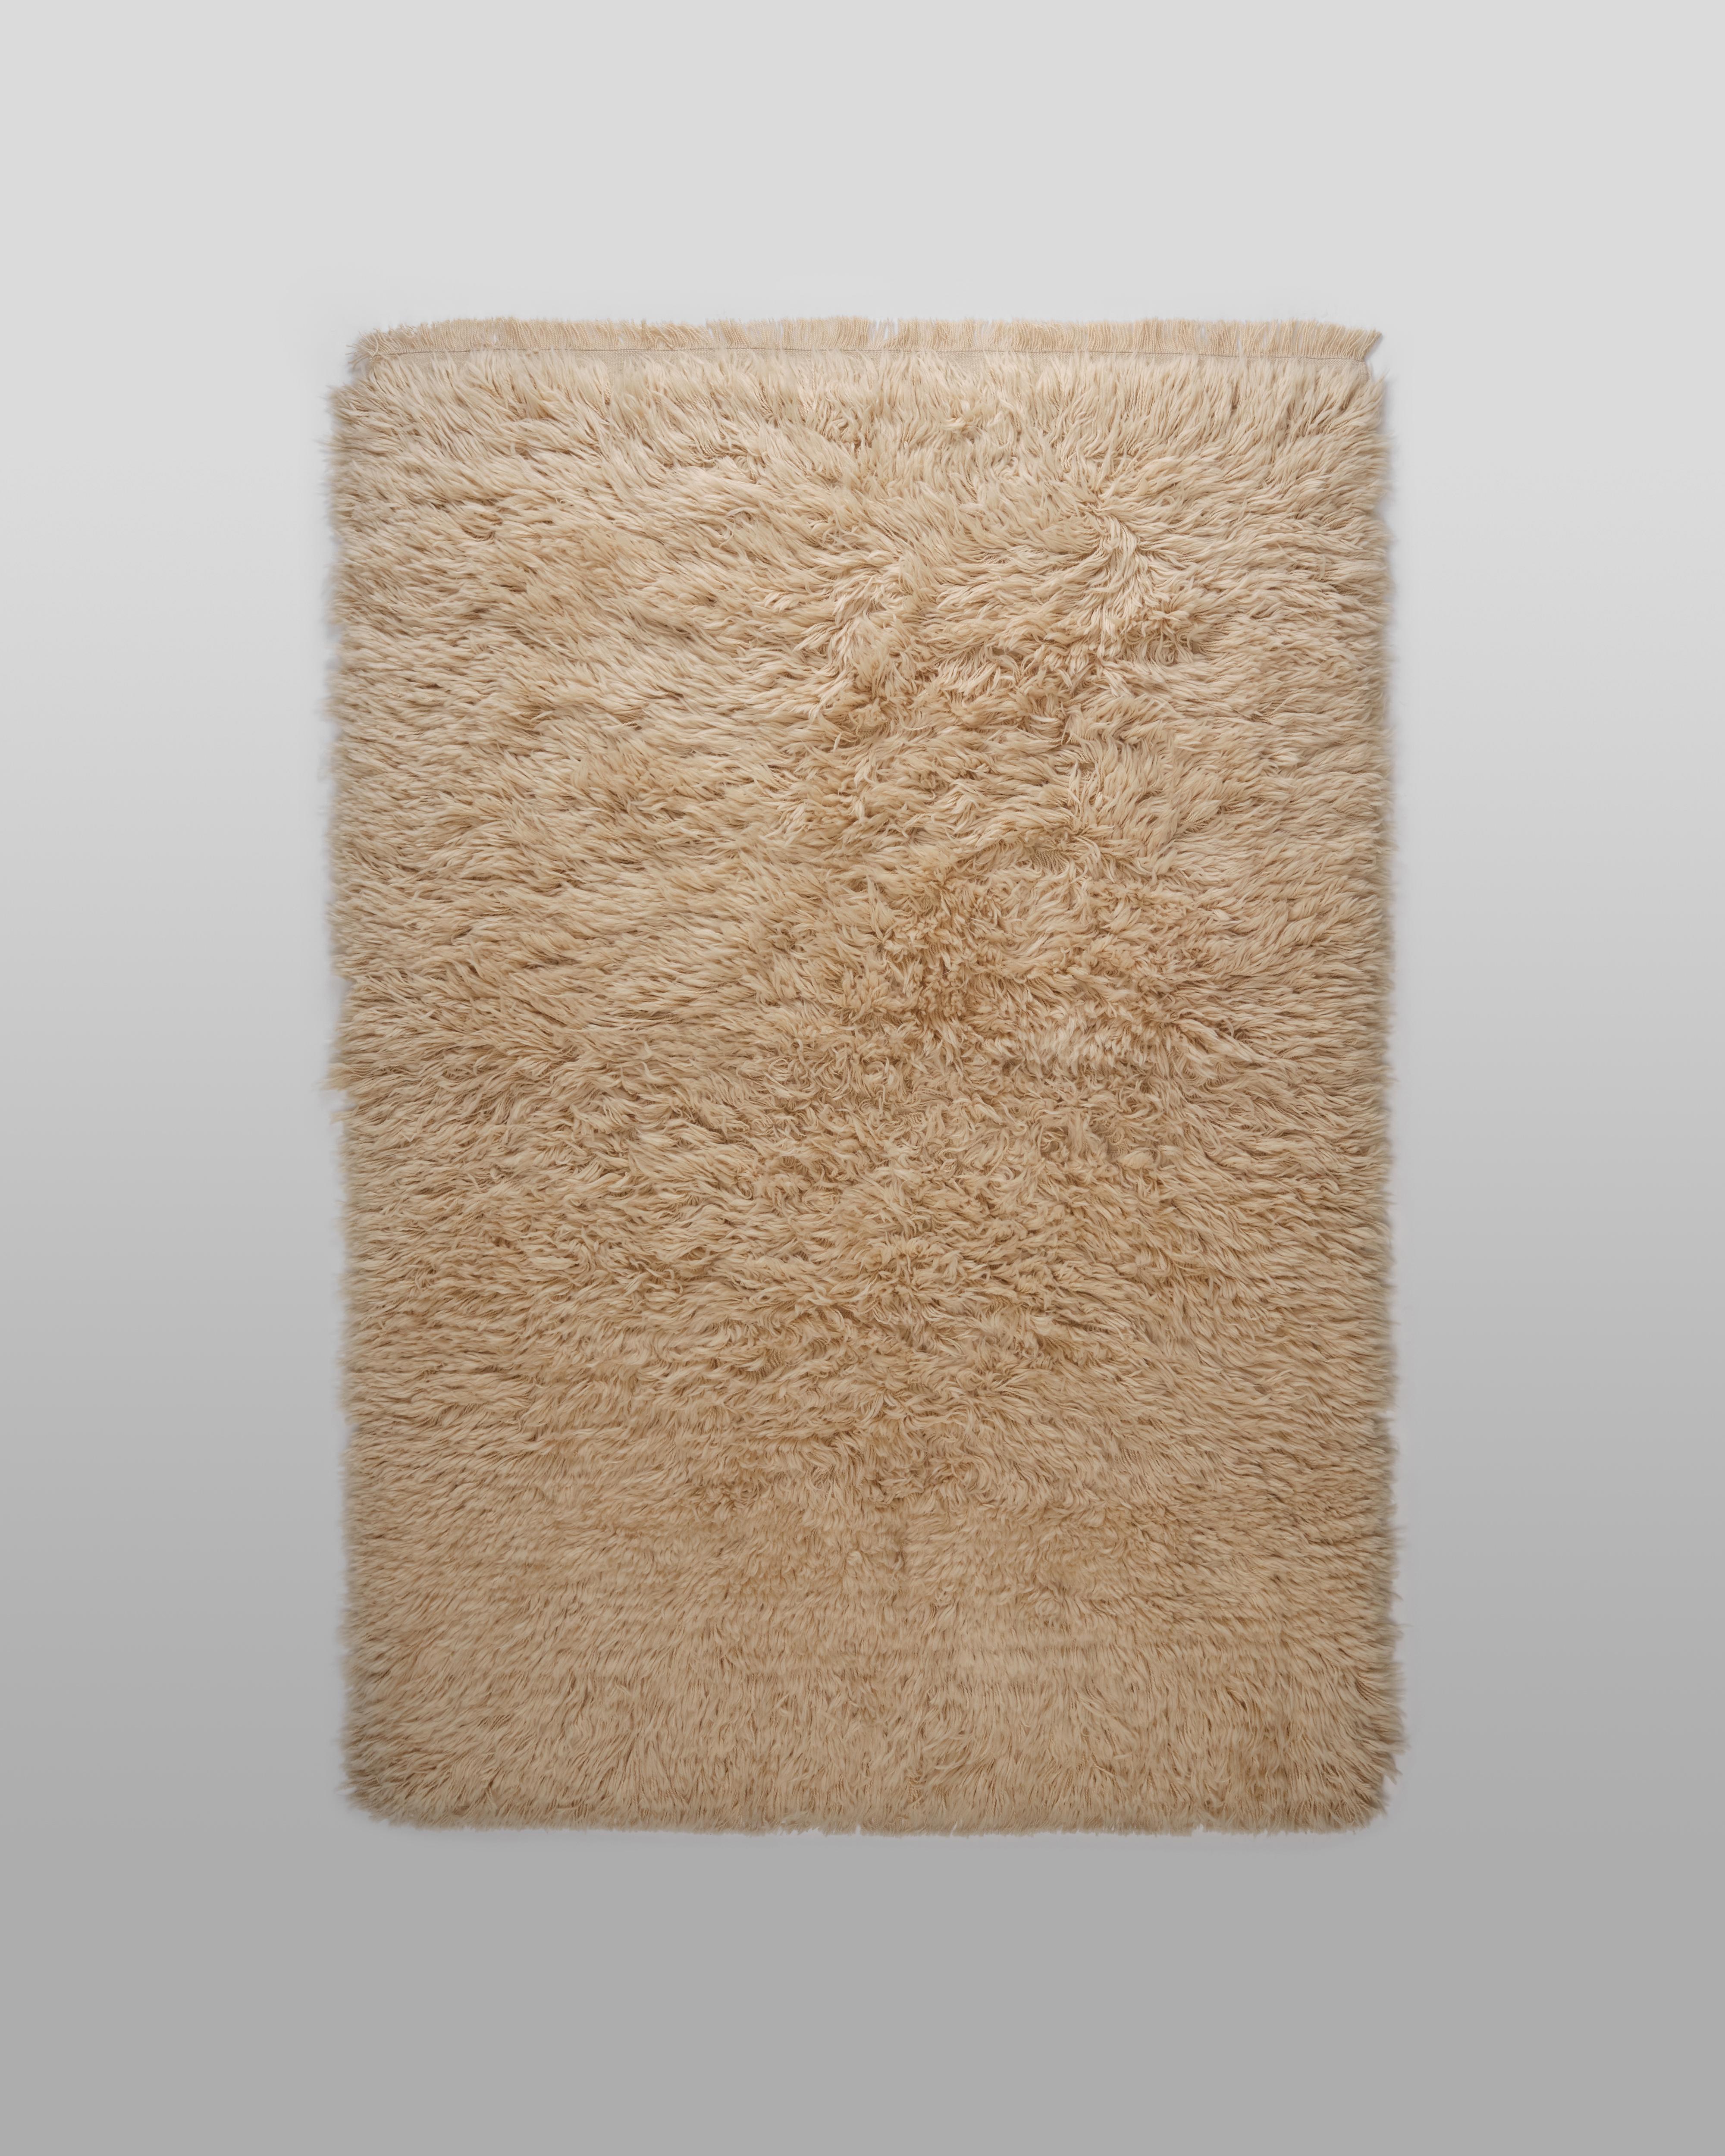 Contemporary The Forsyth Woolly Shag Rug - Natural, 9x12 For Sale